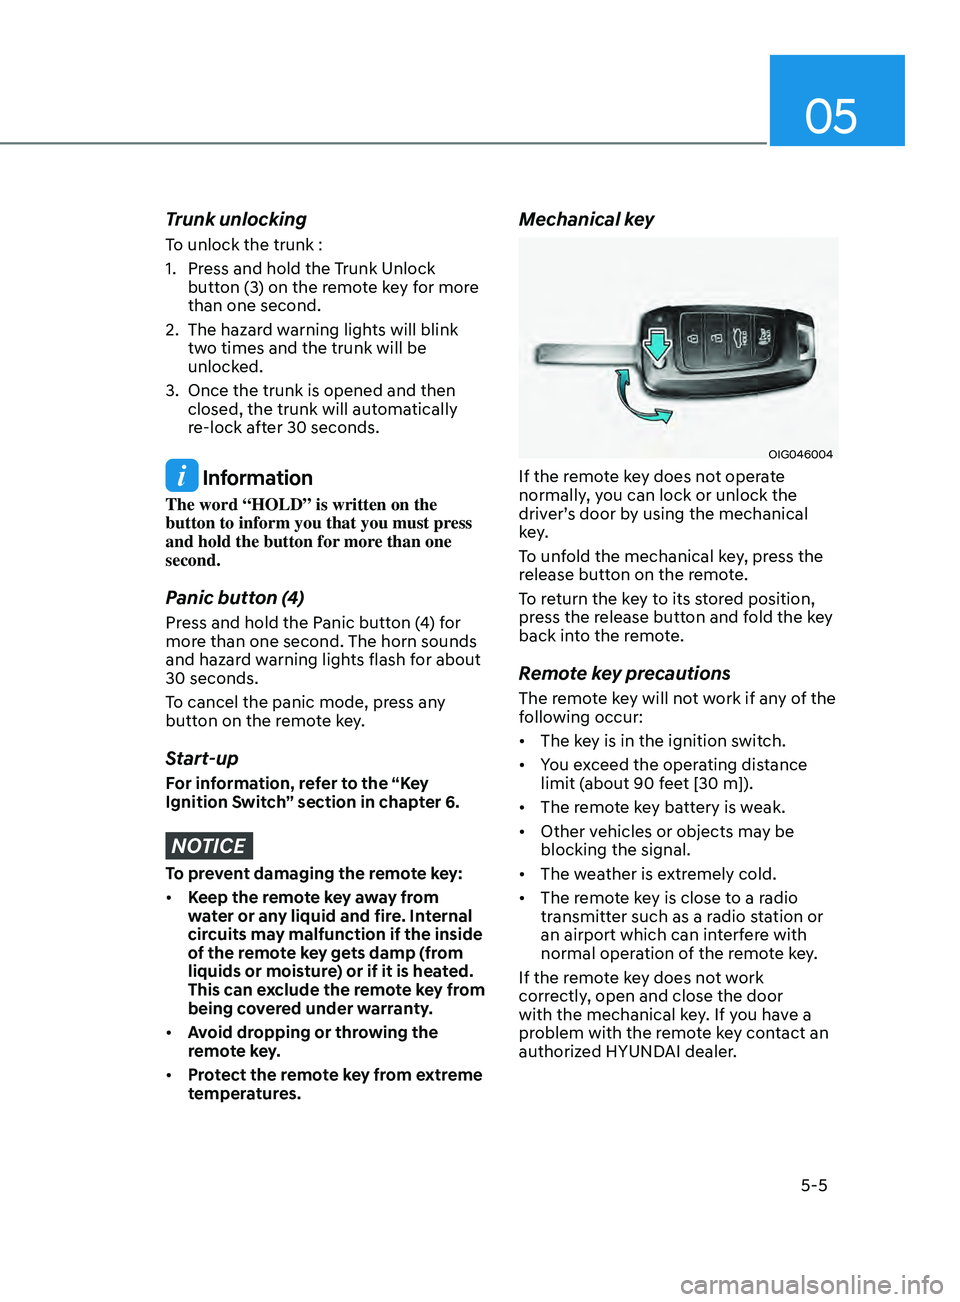 HYUNDAI SONATA LIMITED 2022  Owners Manual 05
5-5
Trunk unlocking
To unlock the trunk :
1. 
Pr
 ess and hold the Trunk Unlock 
button (3) on the remote key for more 
than one second.
2.
 
The hazar
 d warning lights will blink 
two times and t